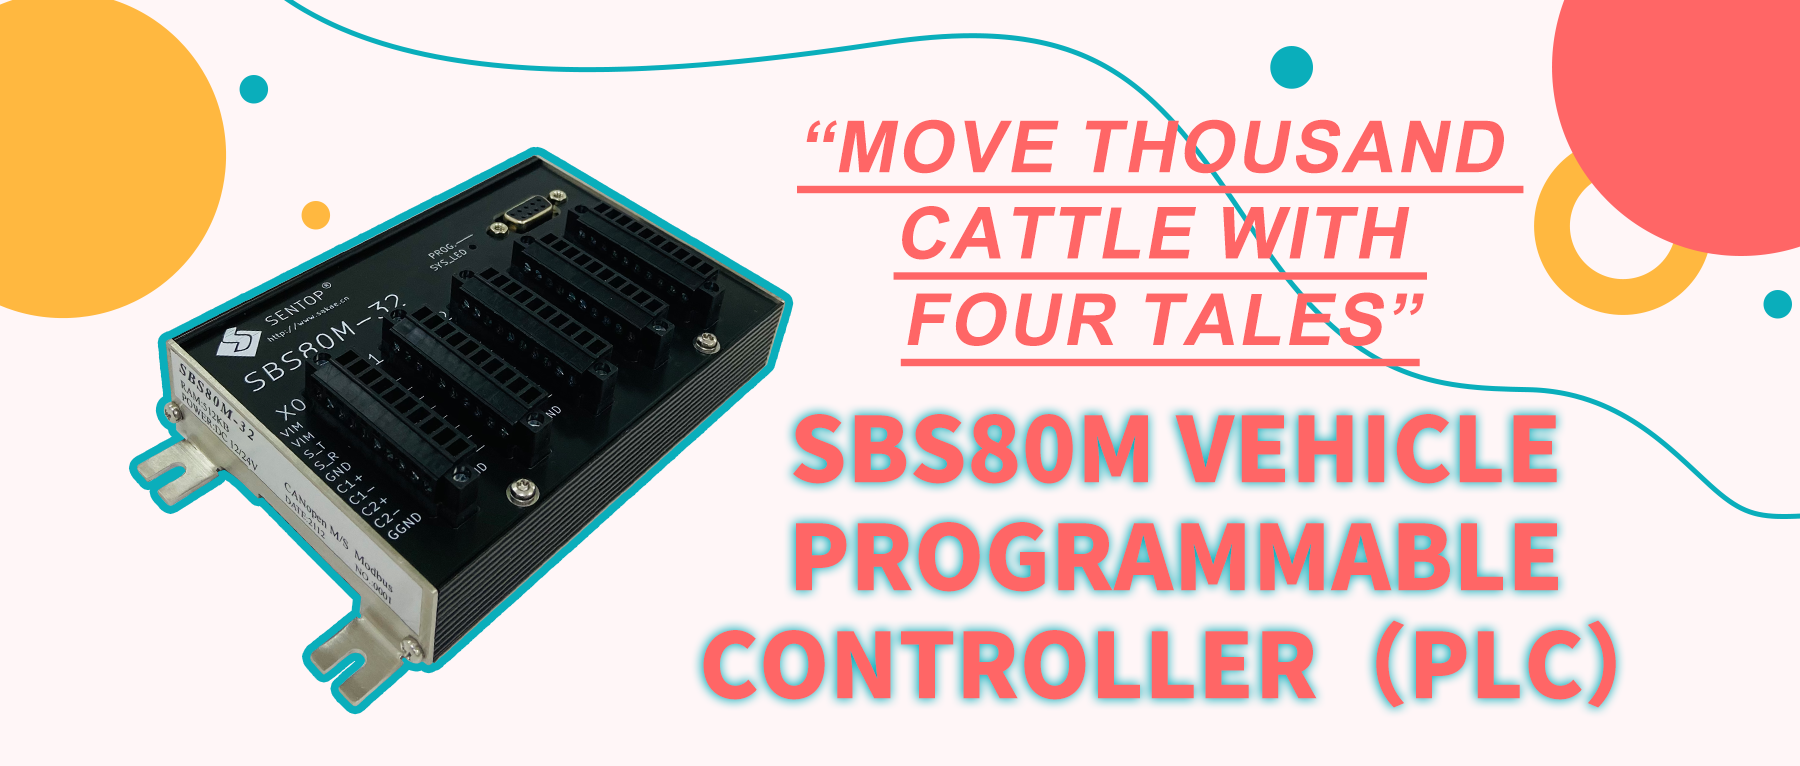 'Move thousand cattle with four tales' - SBS80M vehicle Programmable Controller (PLC)